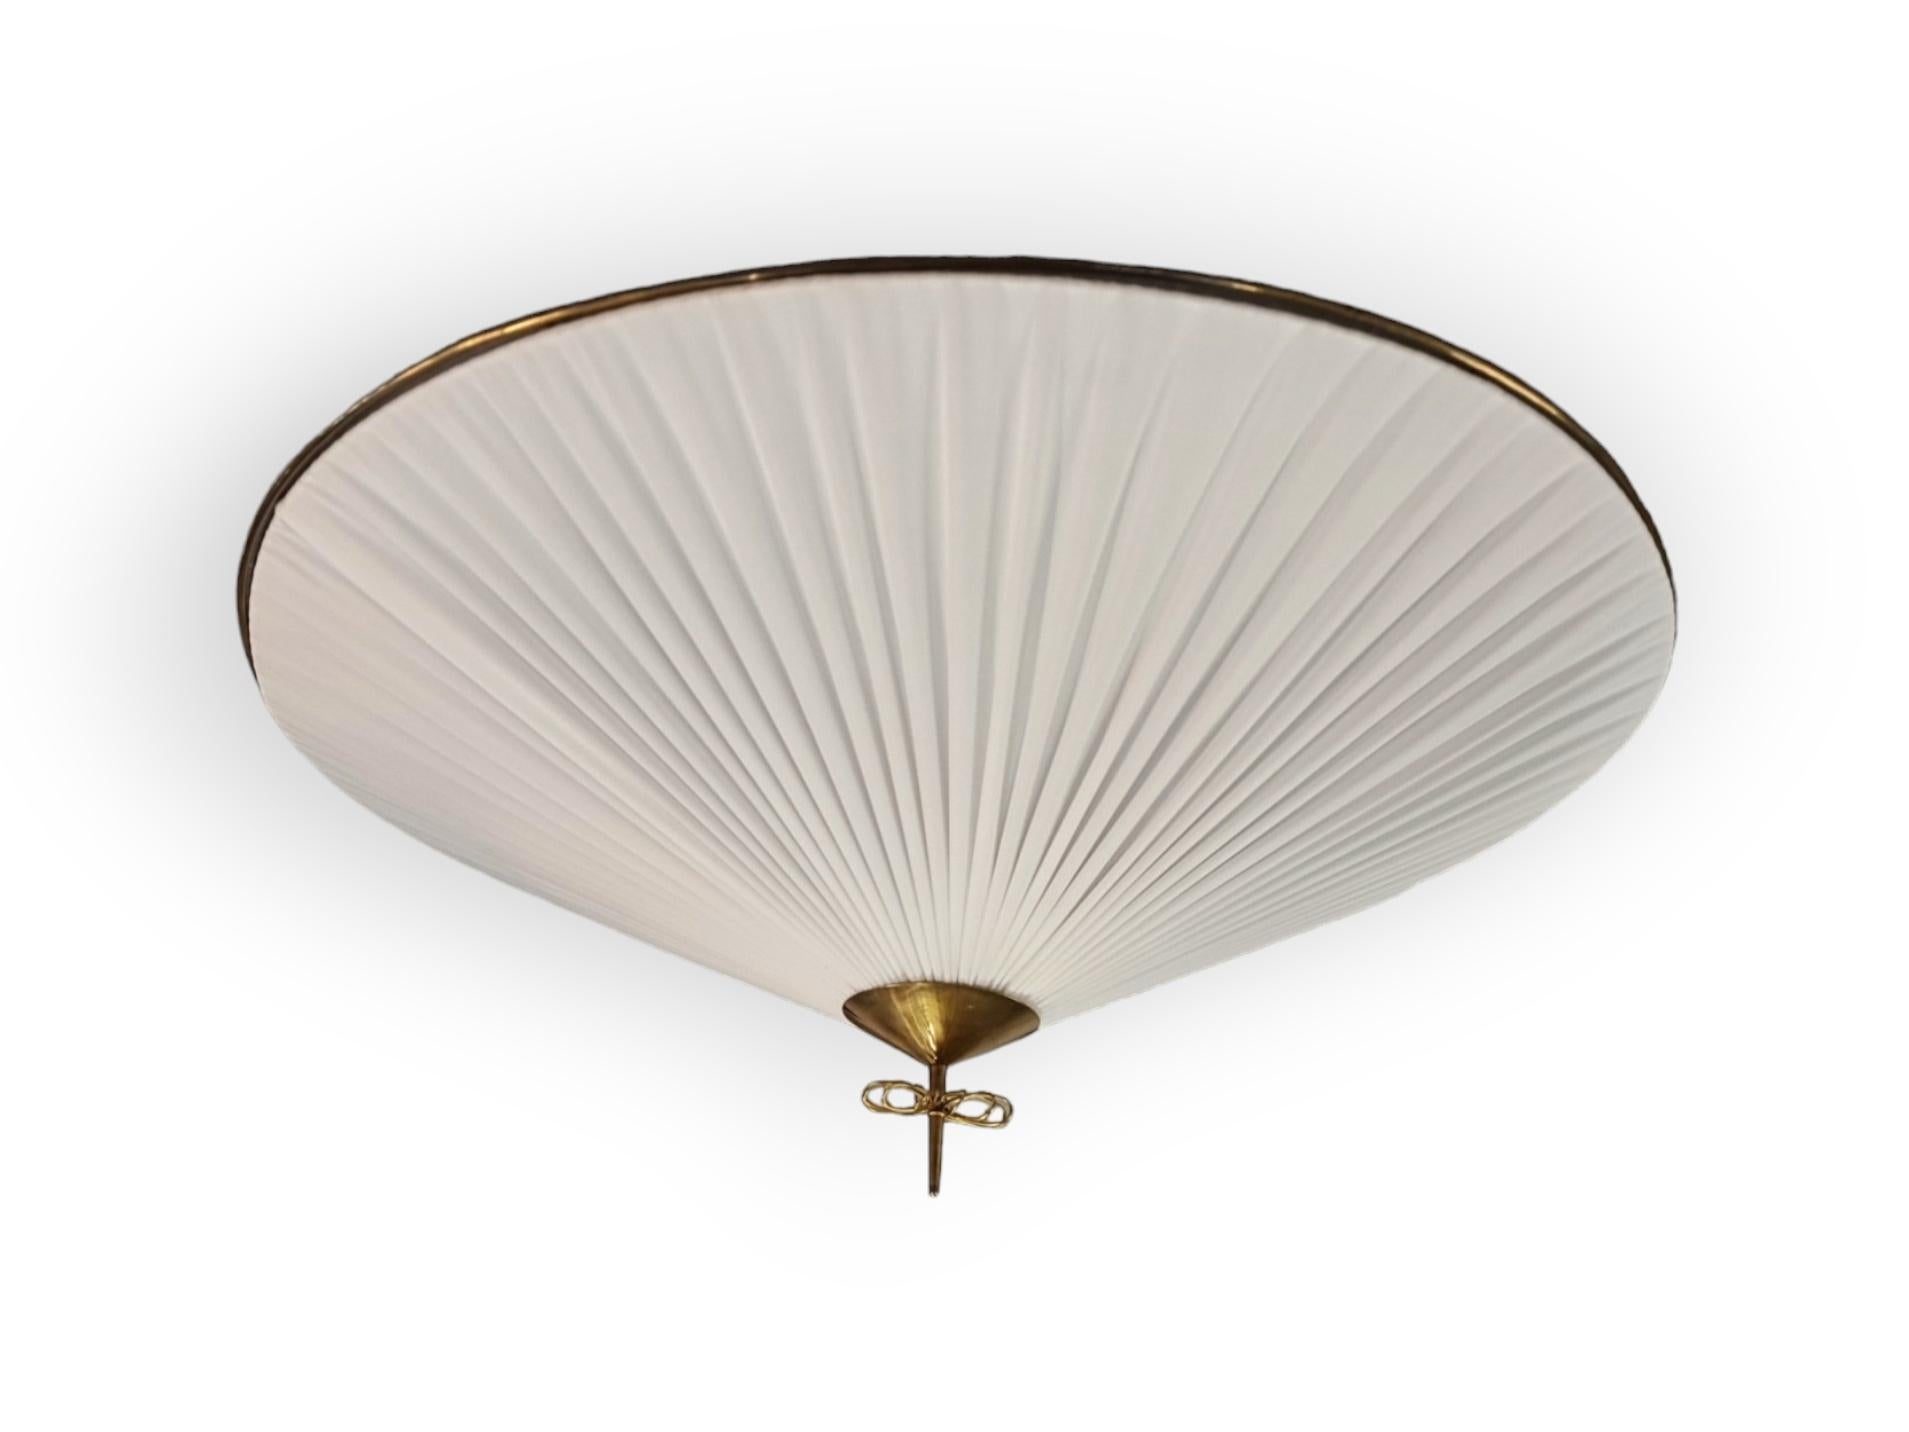 Monumental Paavo Tynell Commissioned Ceiling Lamp, In Brass and Fabric, Taito Oy For Sale 2